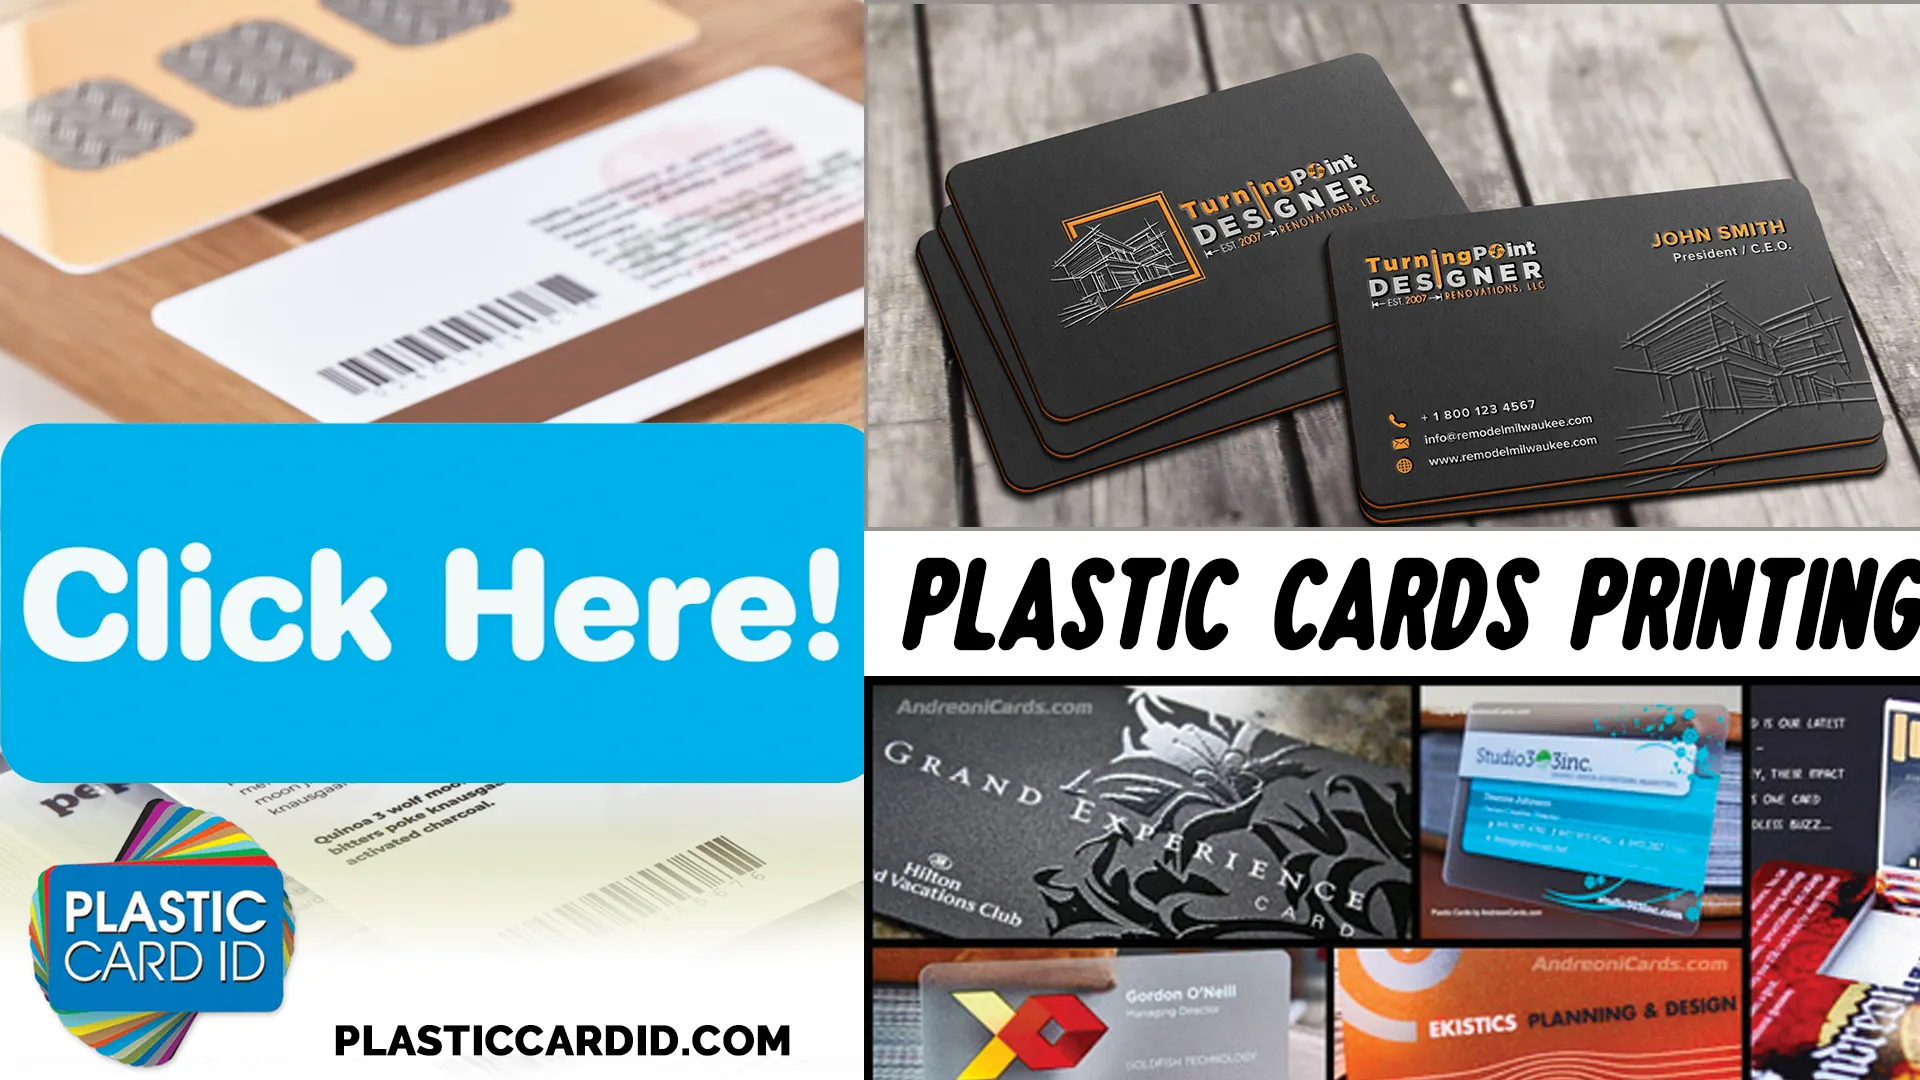 Welcome to the Vibrant World of Creative Marketing with Plastic Cards